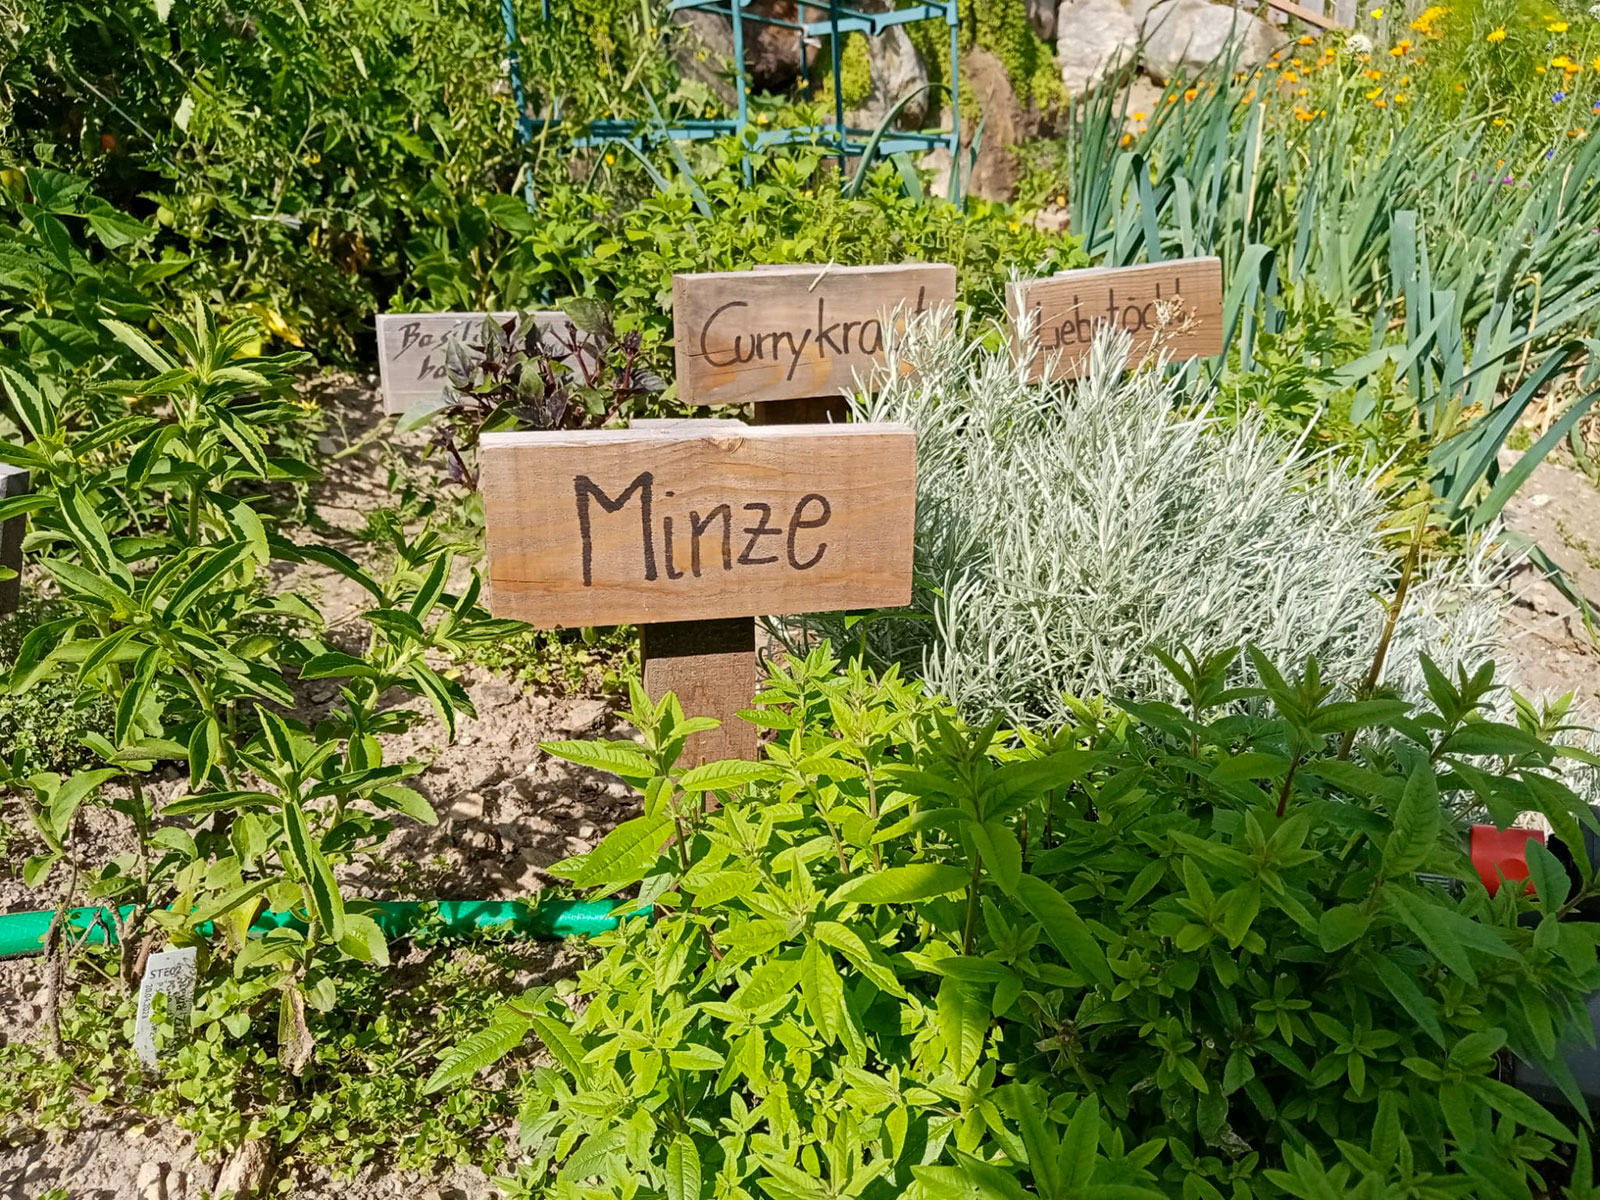 Herbs like our mint here